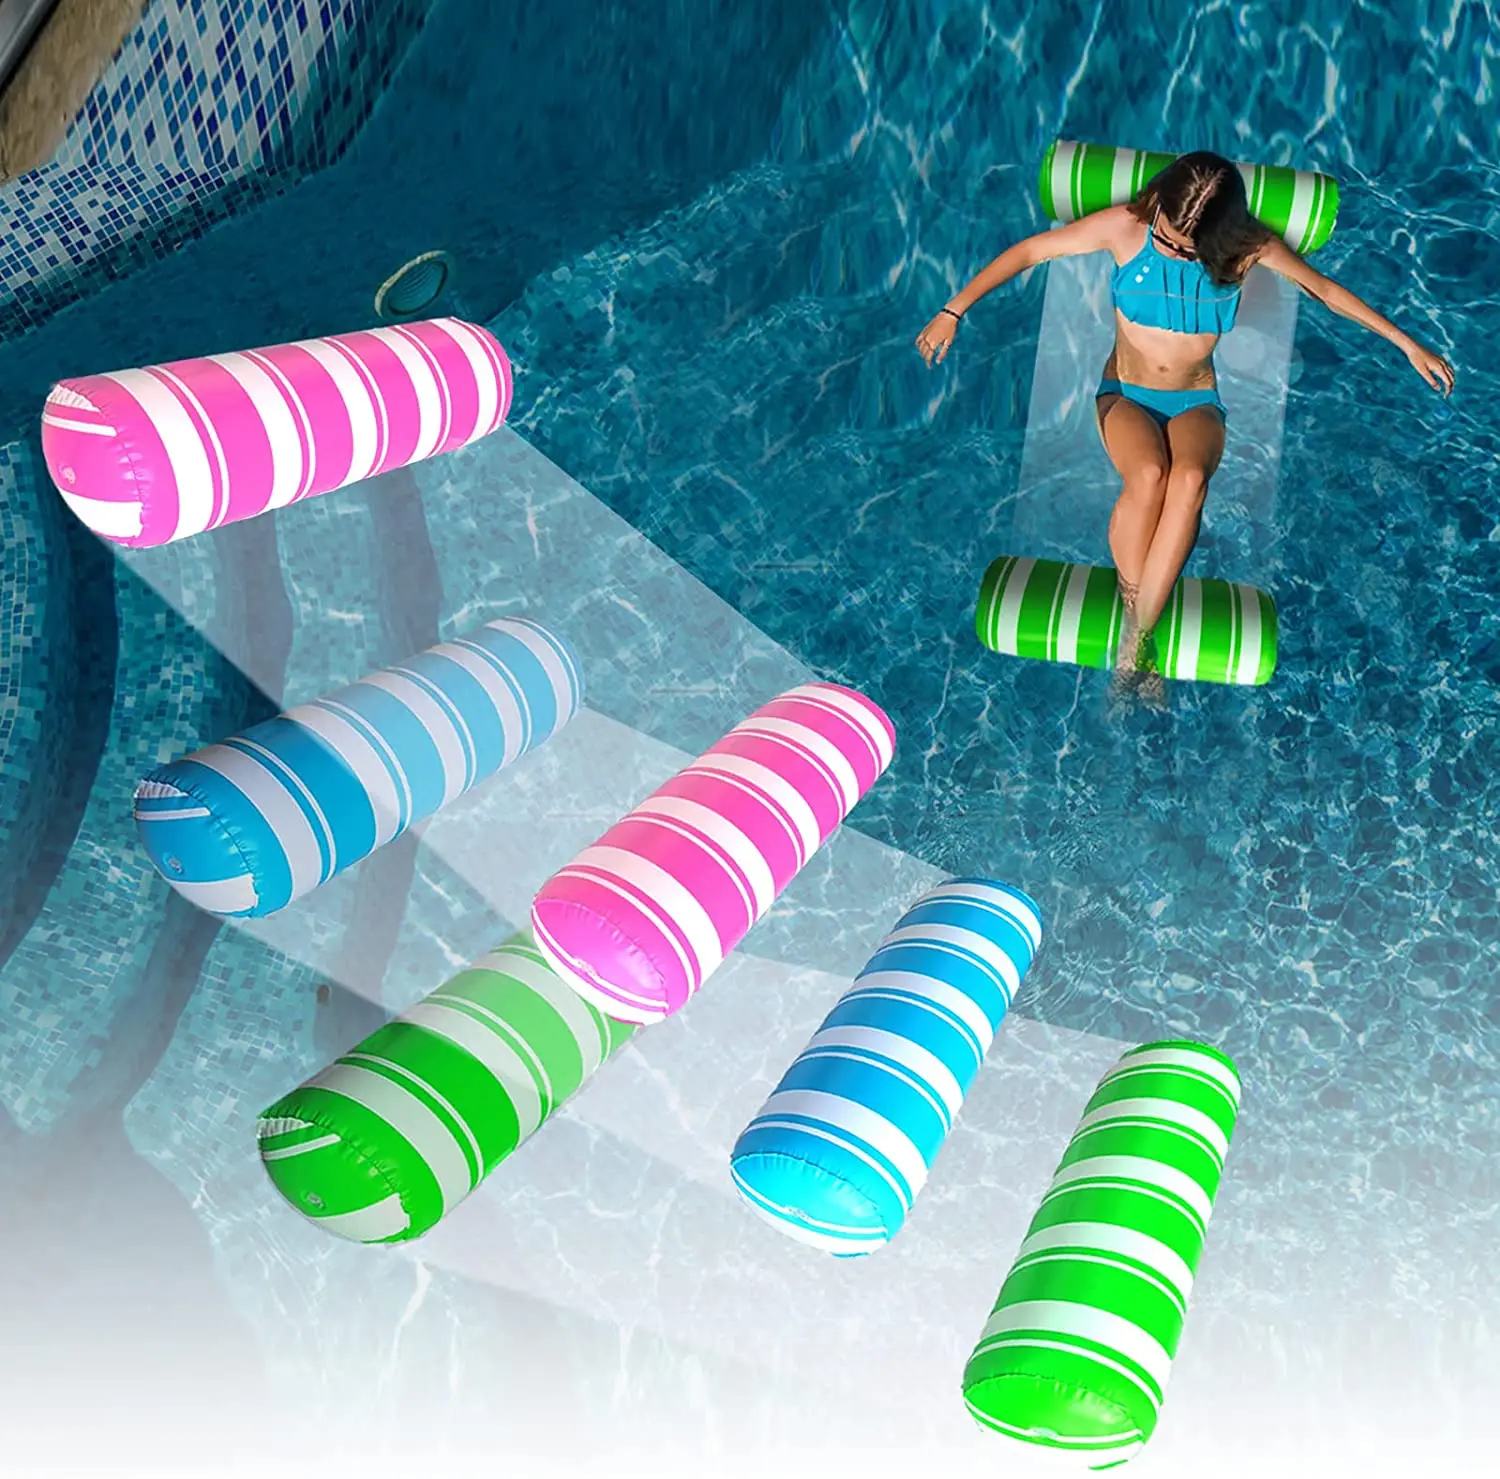 

3 Pack Inflatable Pool Floats Water Hammock,Pool Floaties Toys,Floats for Swimming Pool Rafts Lounge Chairs Floating